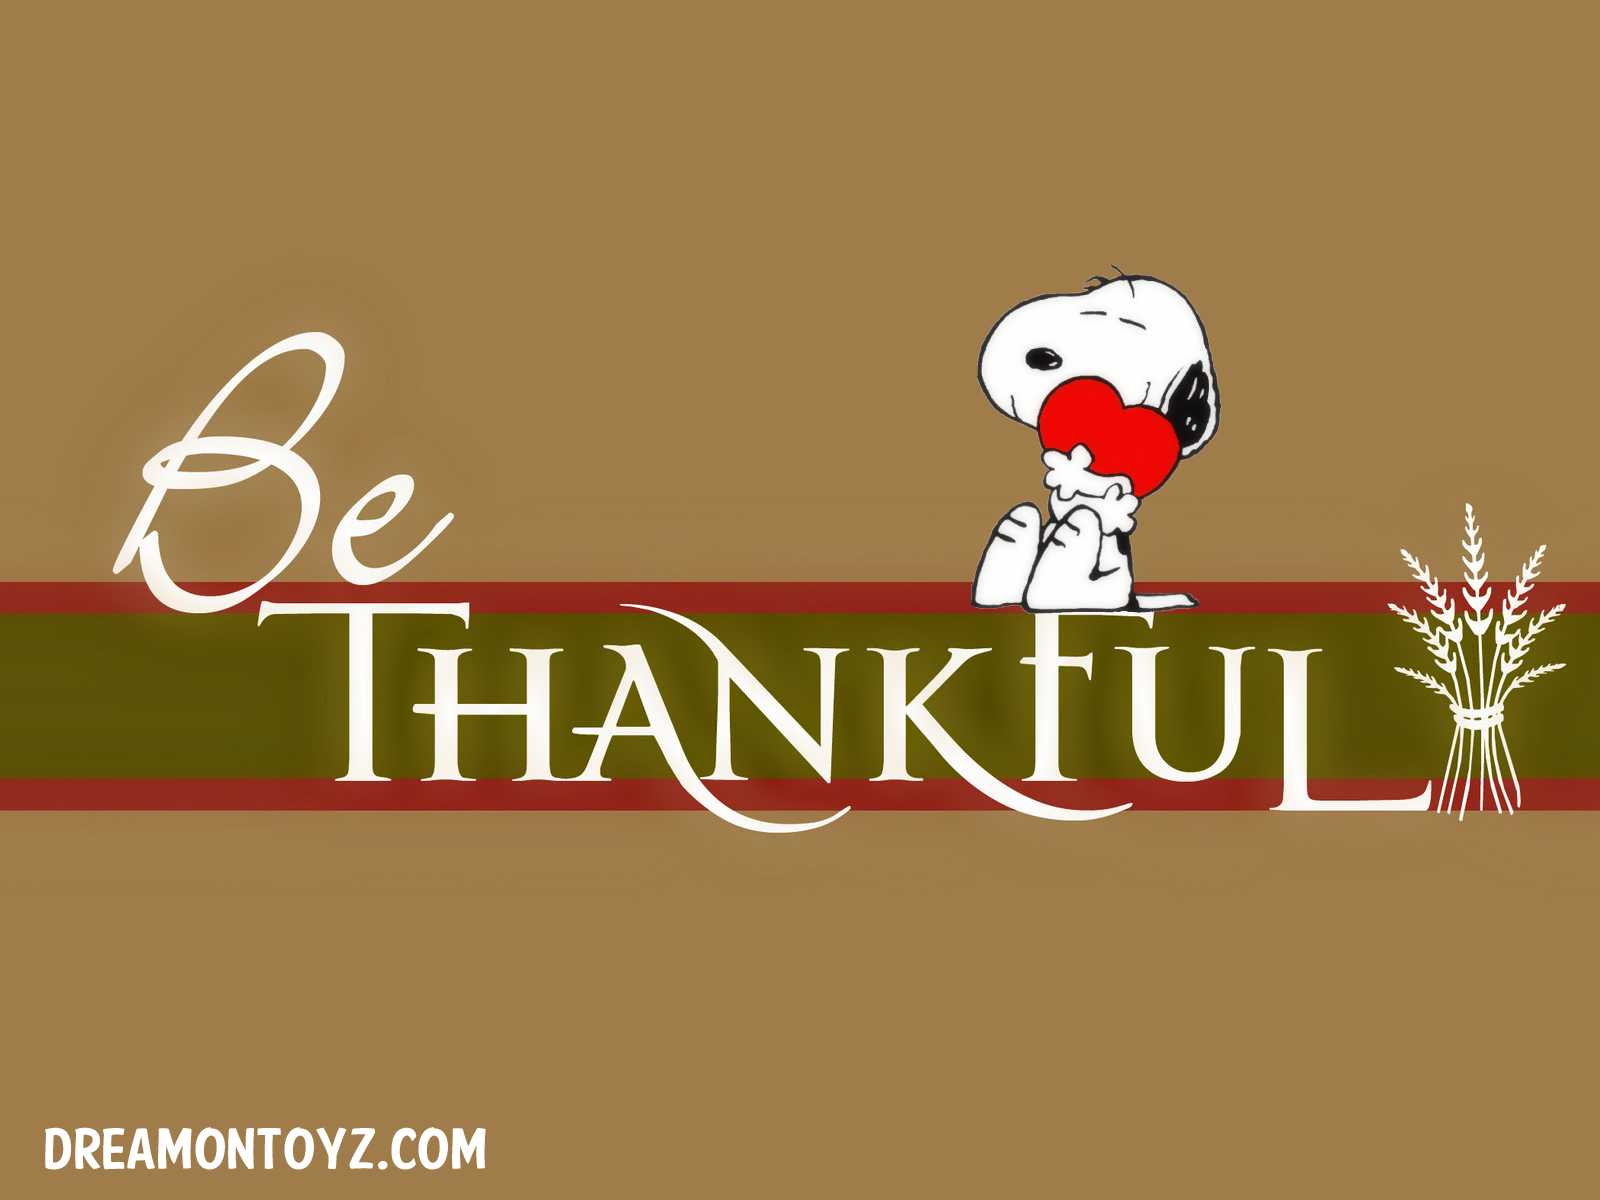  Pics Gifs Photographs Peanuts Snoopy Thanksgiving wallpapers